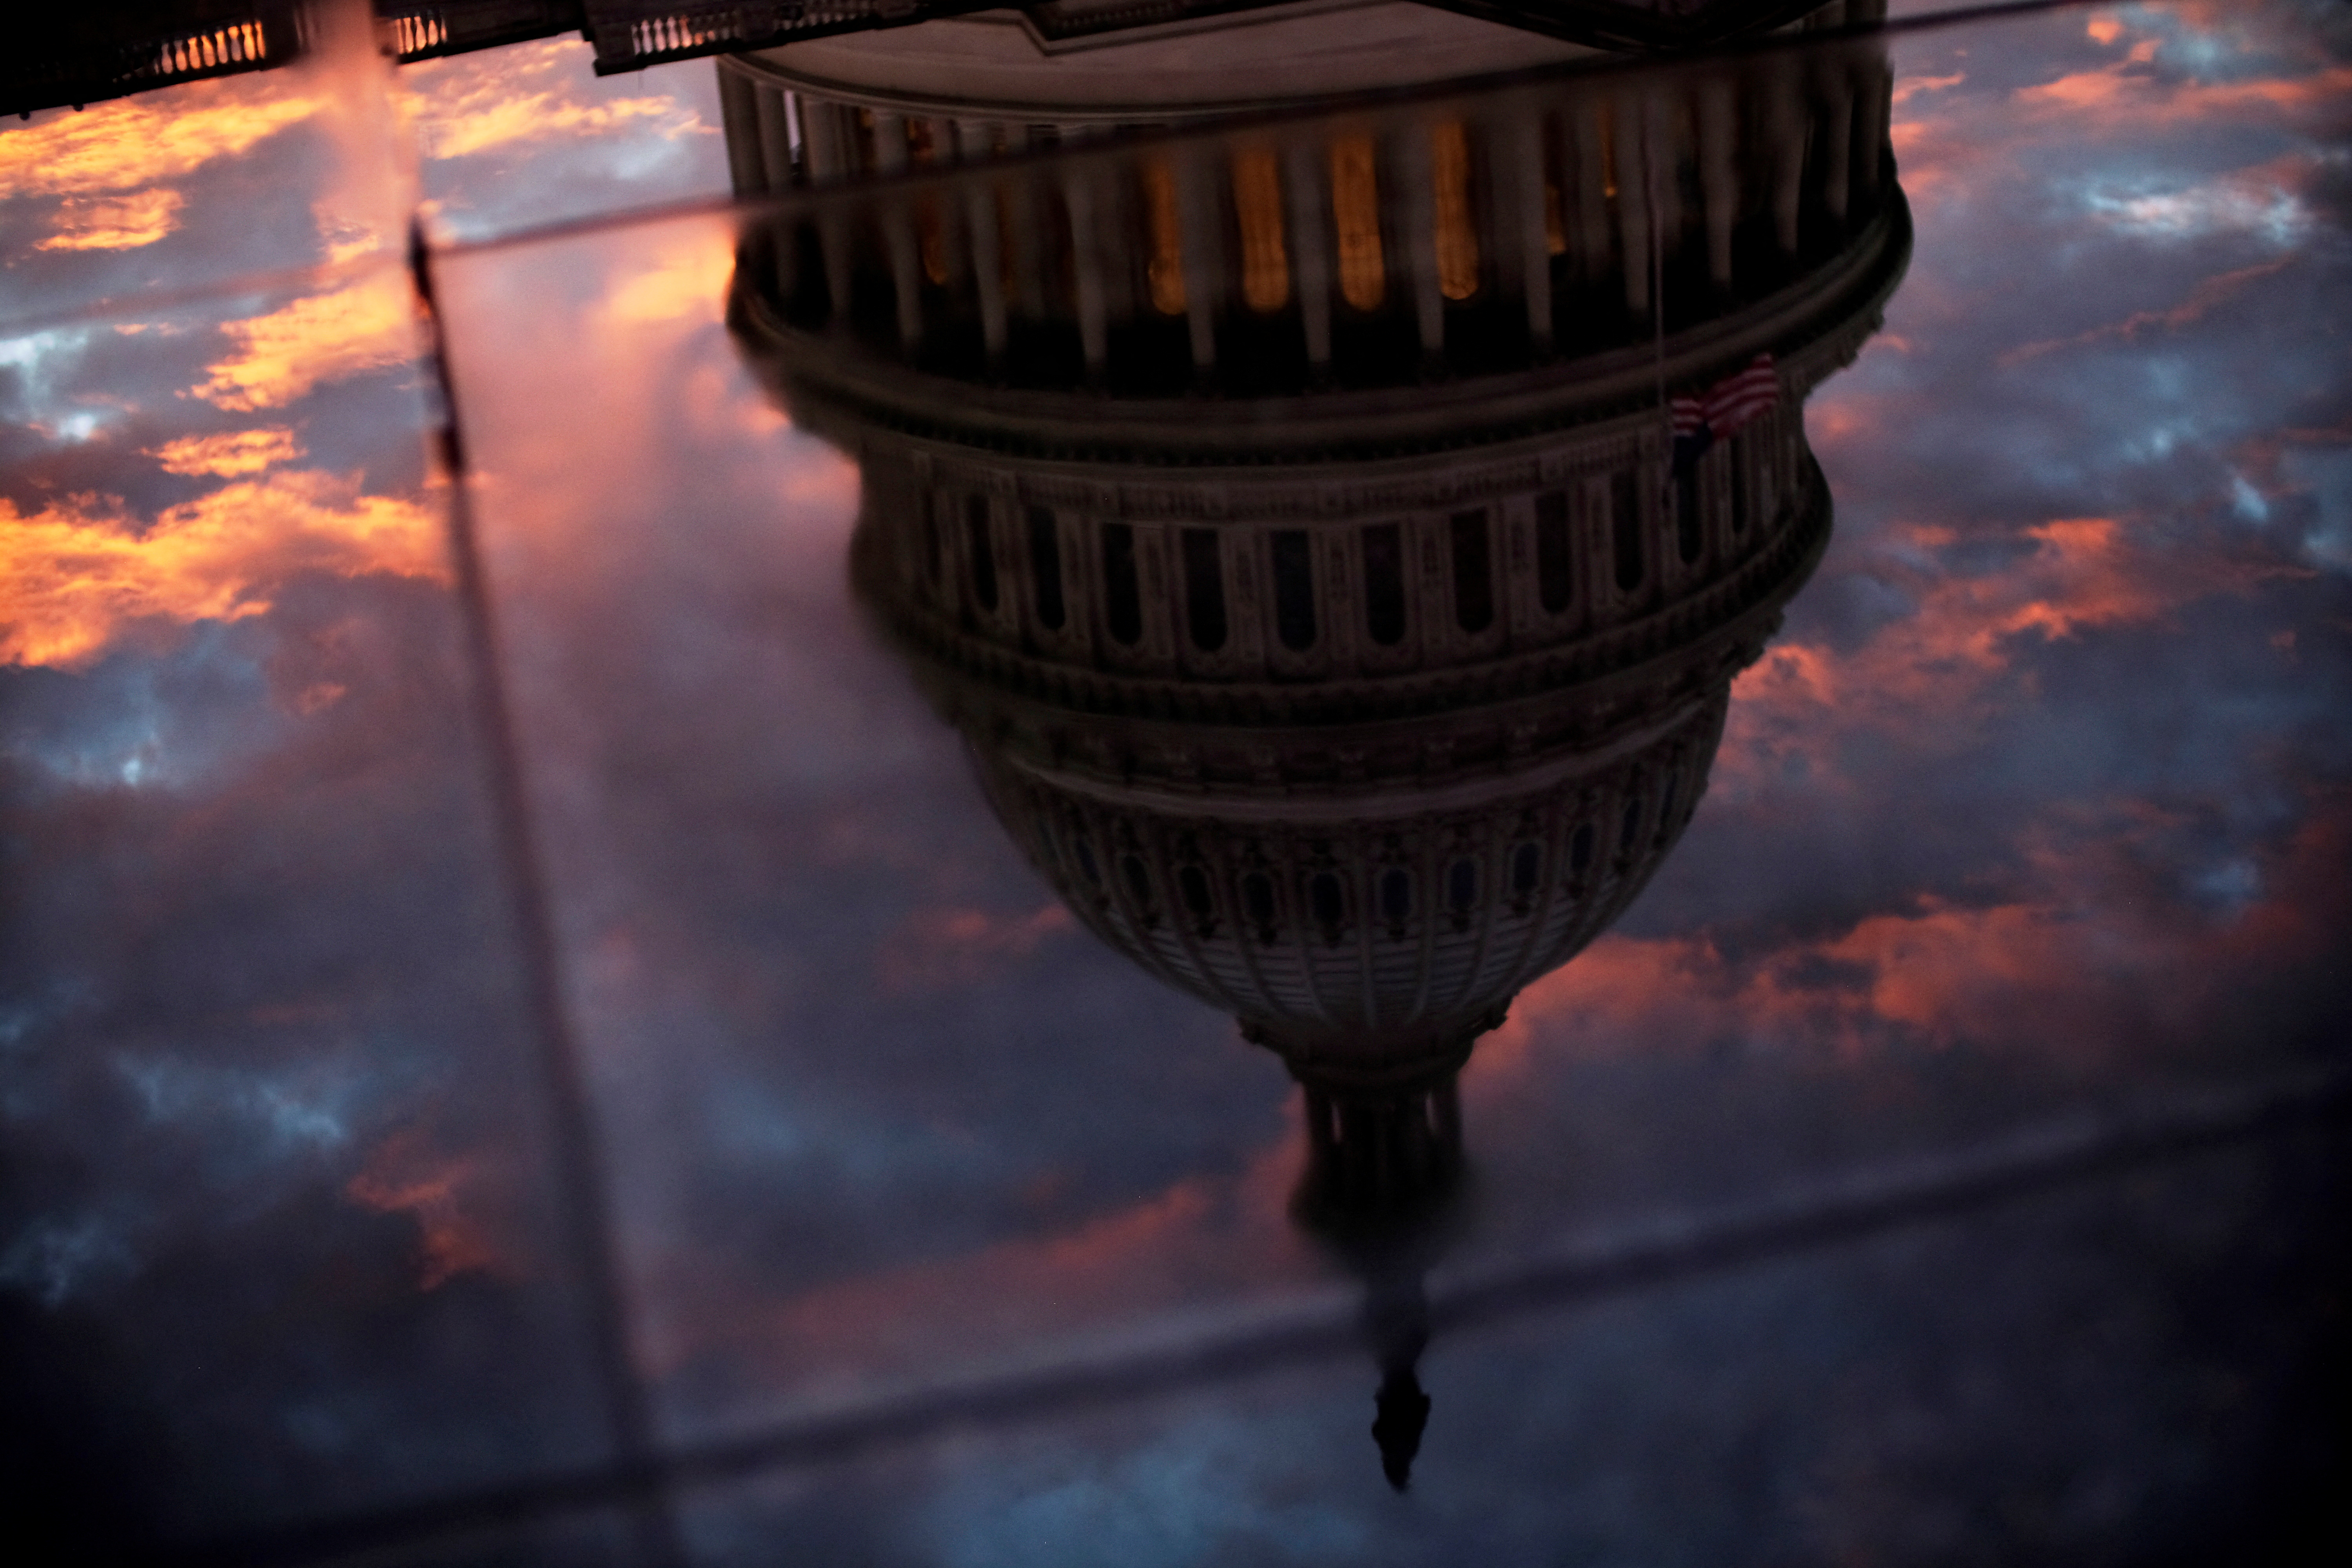 The U.S. Capitol dome is reflected in the glass skylight of the Capitol Visitor Center in Washington